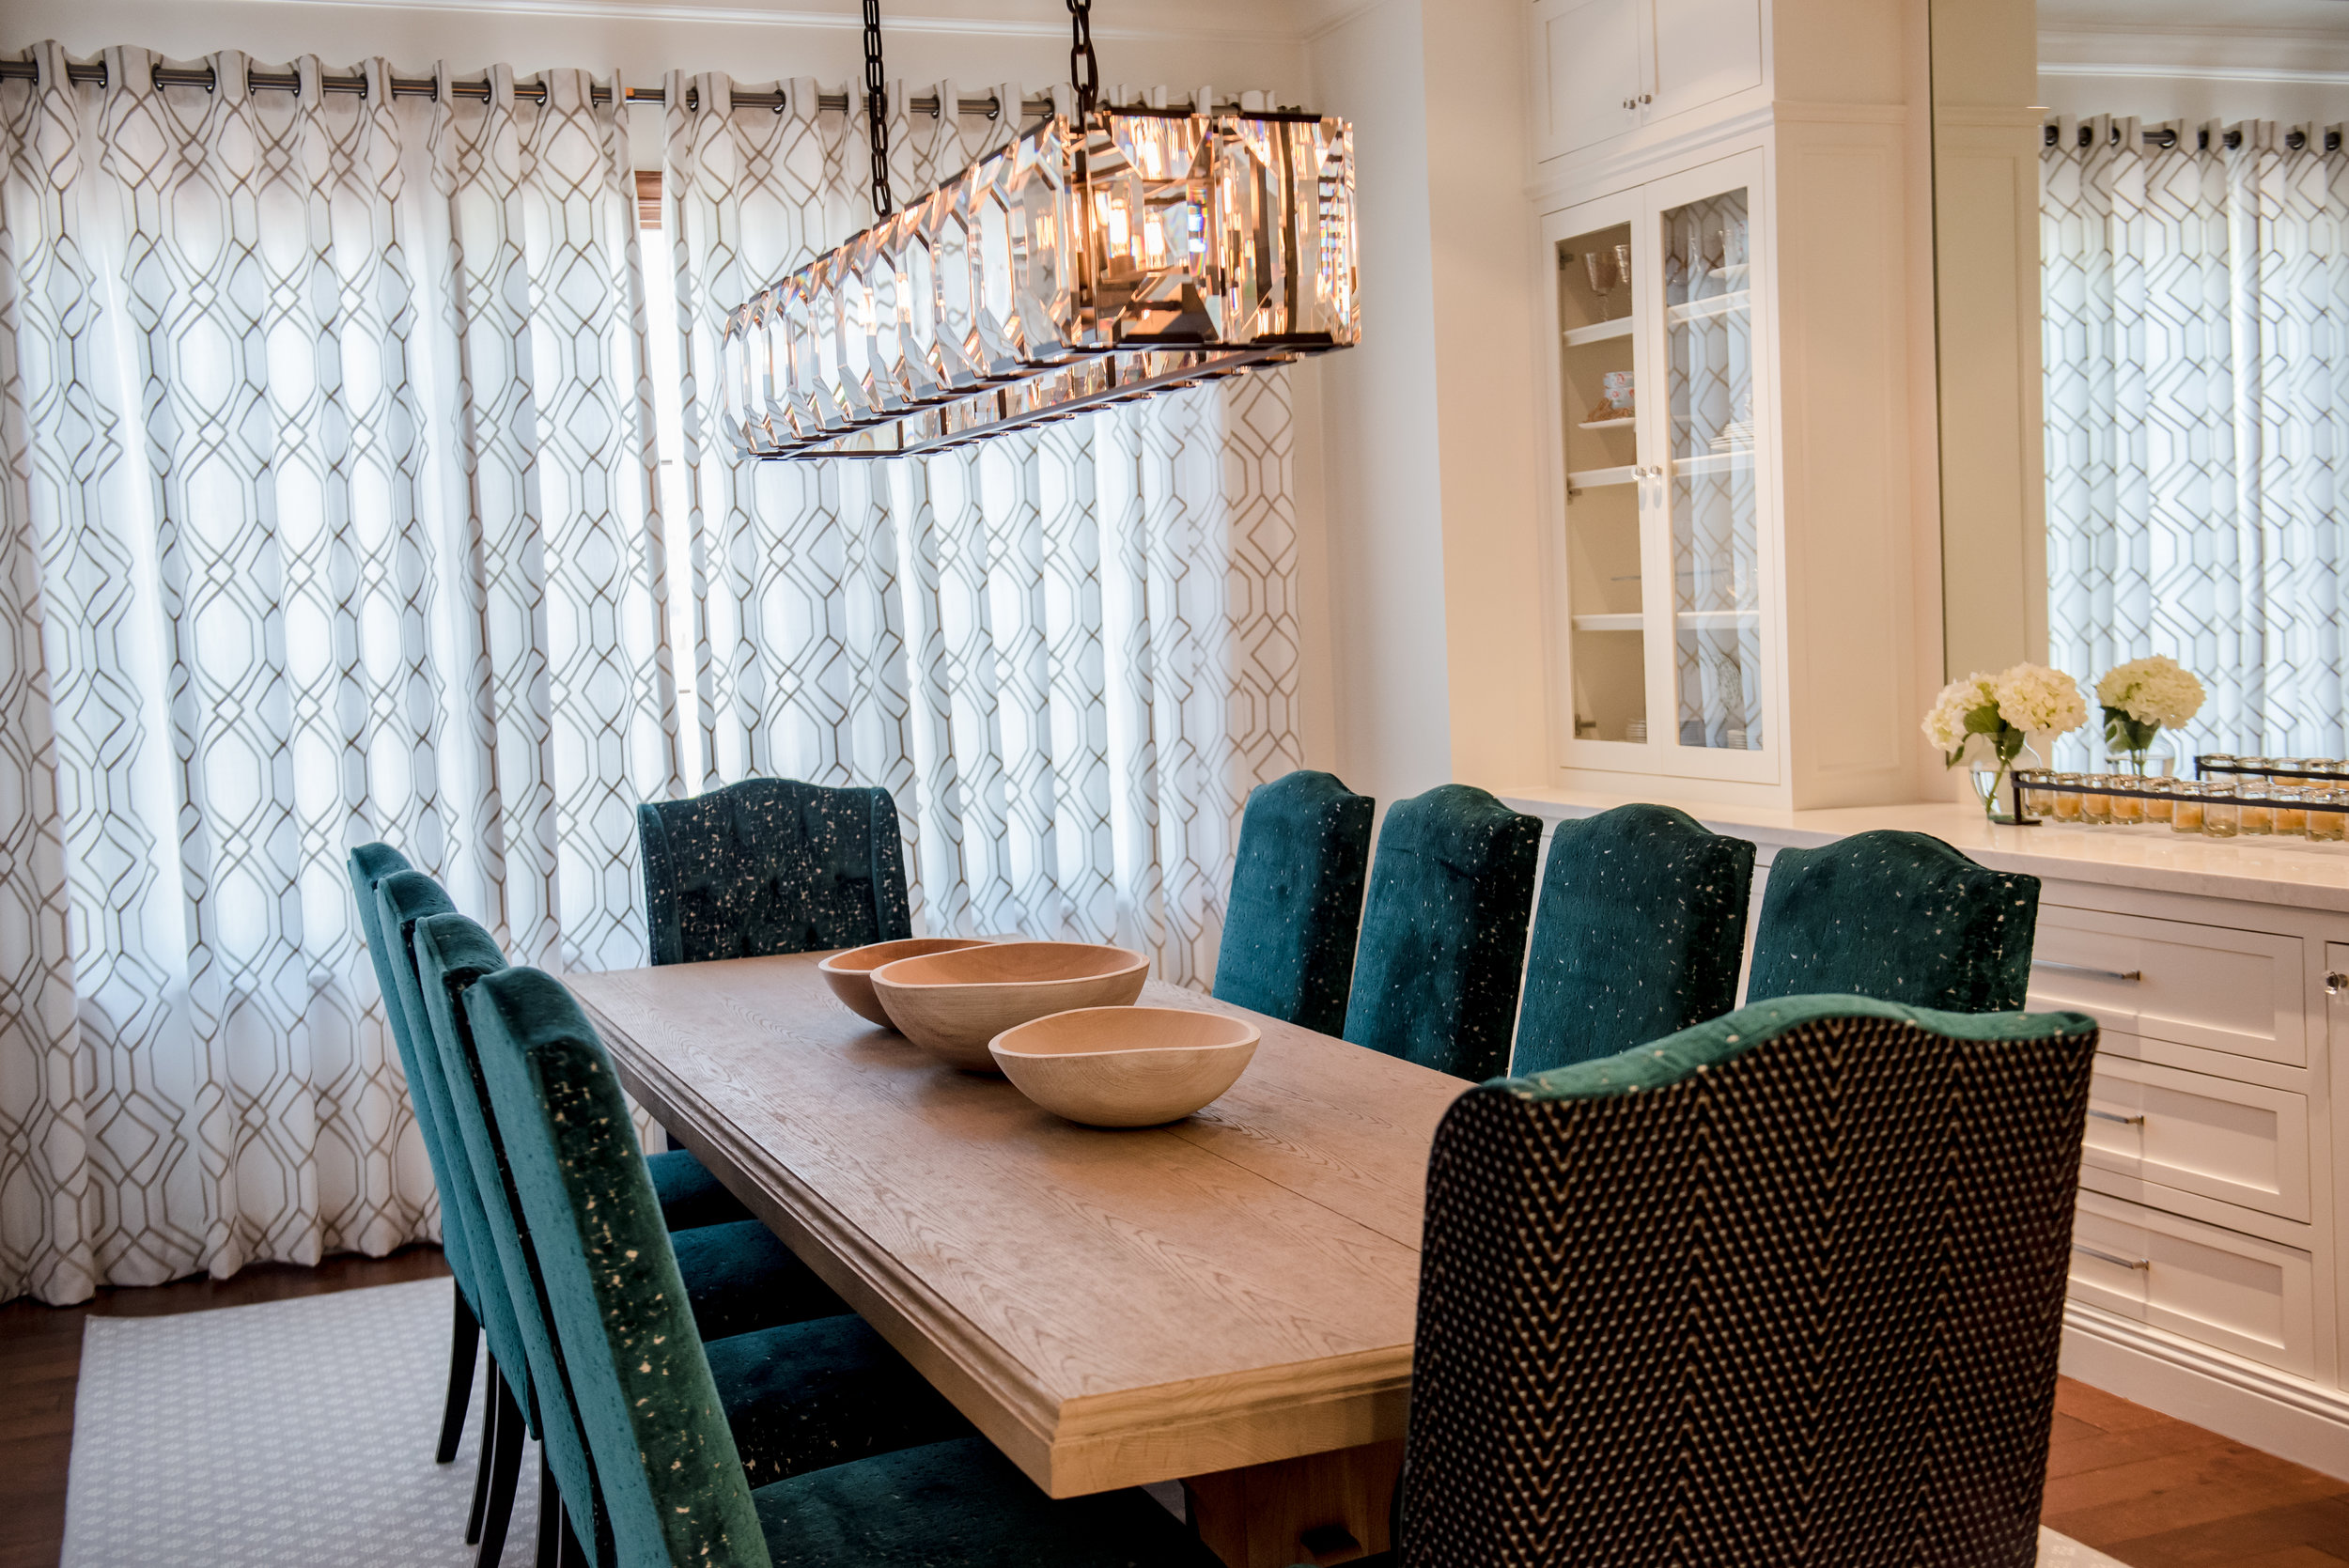 13+Dining+Upholstery+Mirror+Millwork+Crystal+Chandelier+Accessories+Transitional.jpg